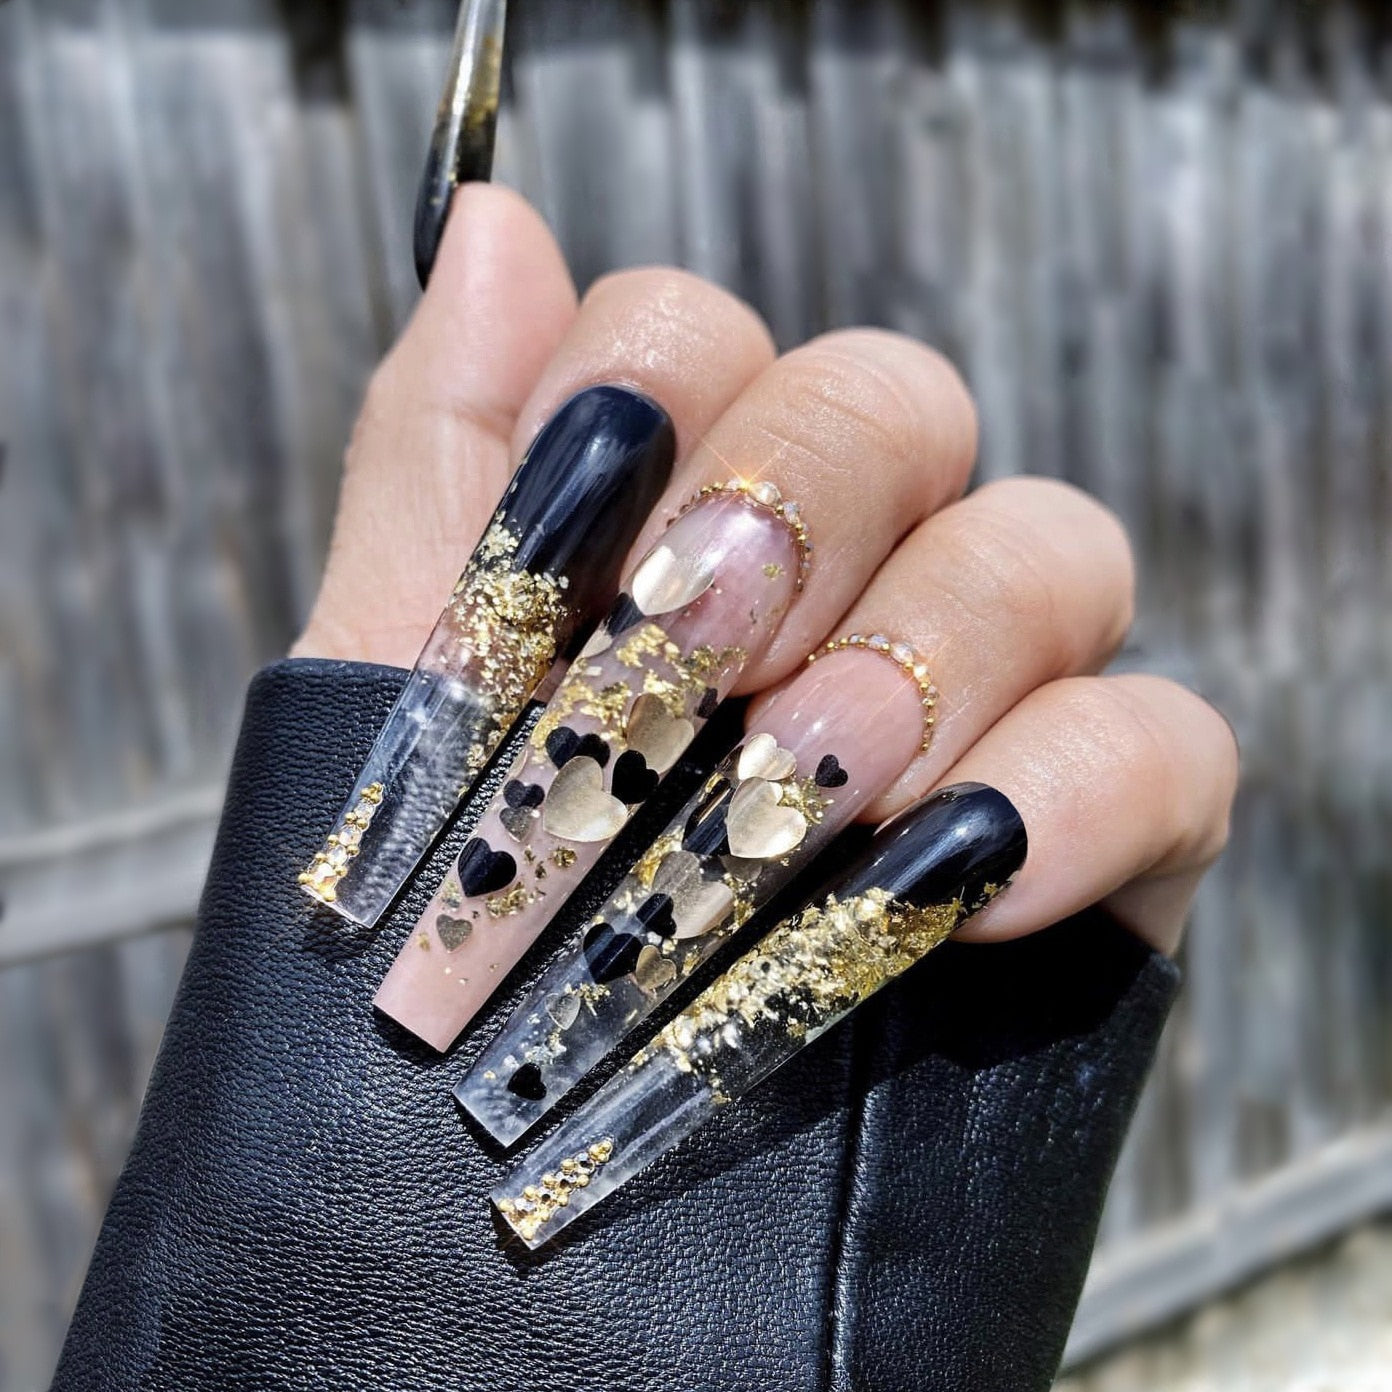 3D fake nails accessories long french coffin tips black gold heart glitters with diamond designs faux ongles press on false nail AMAIO